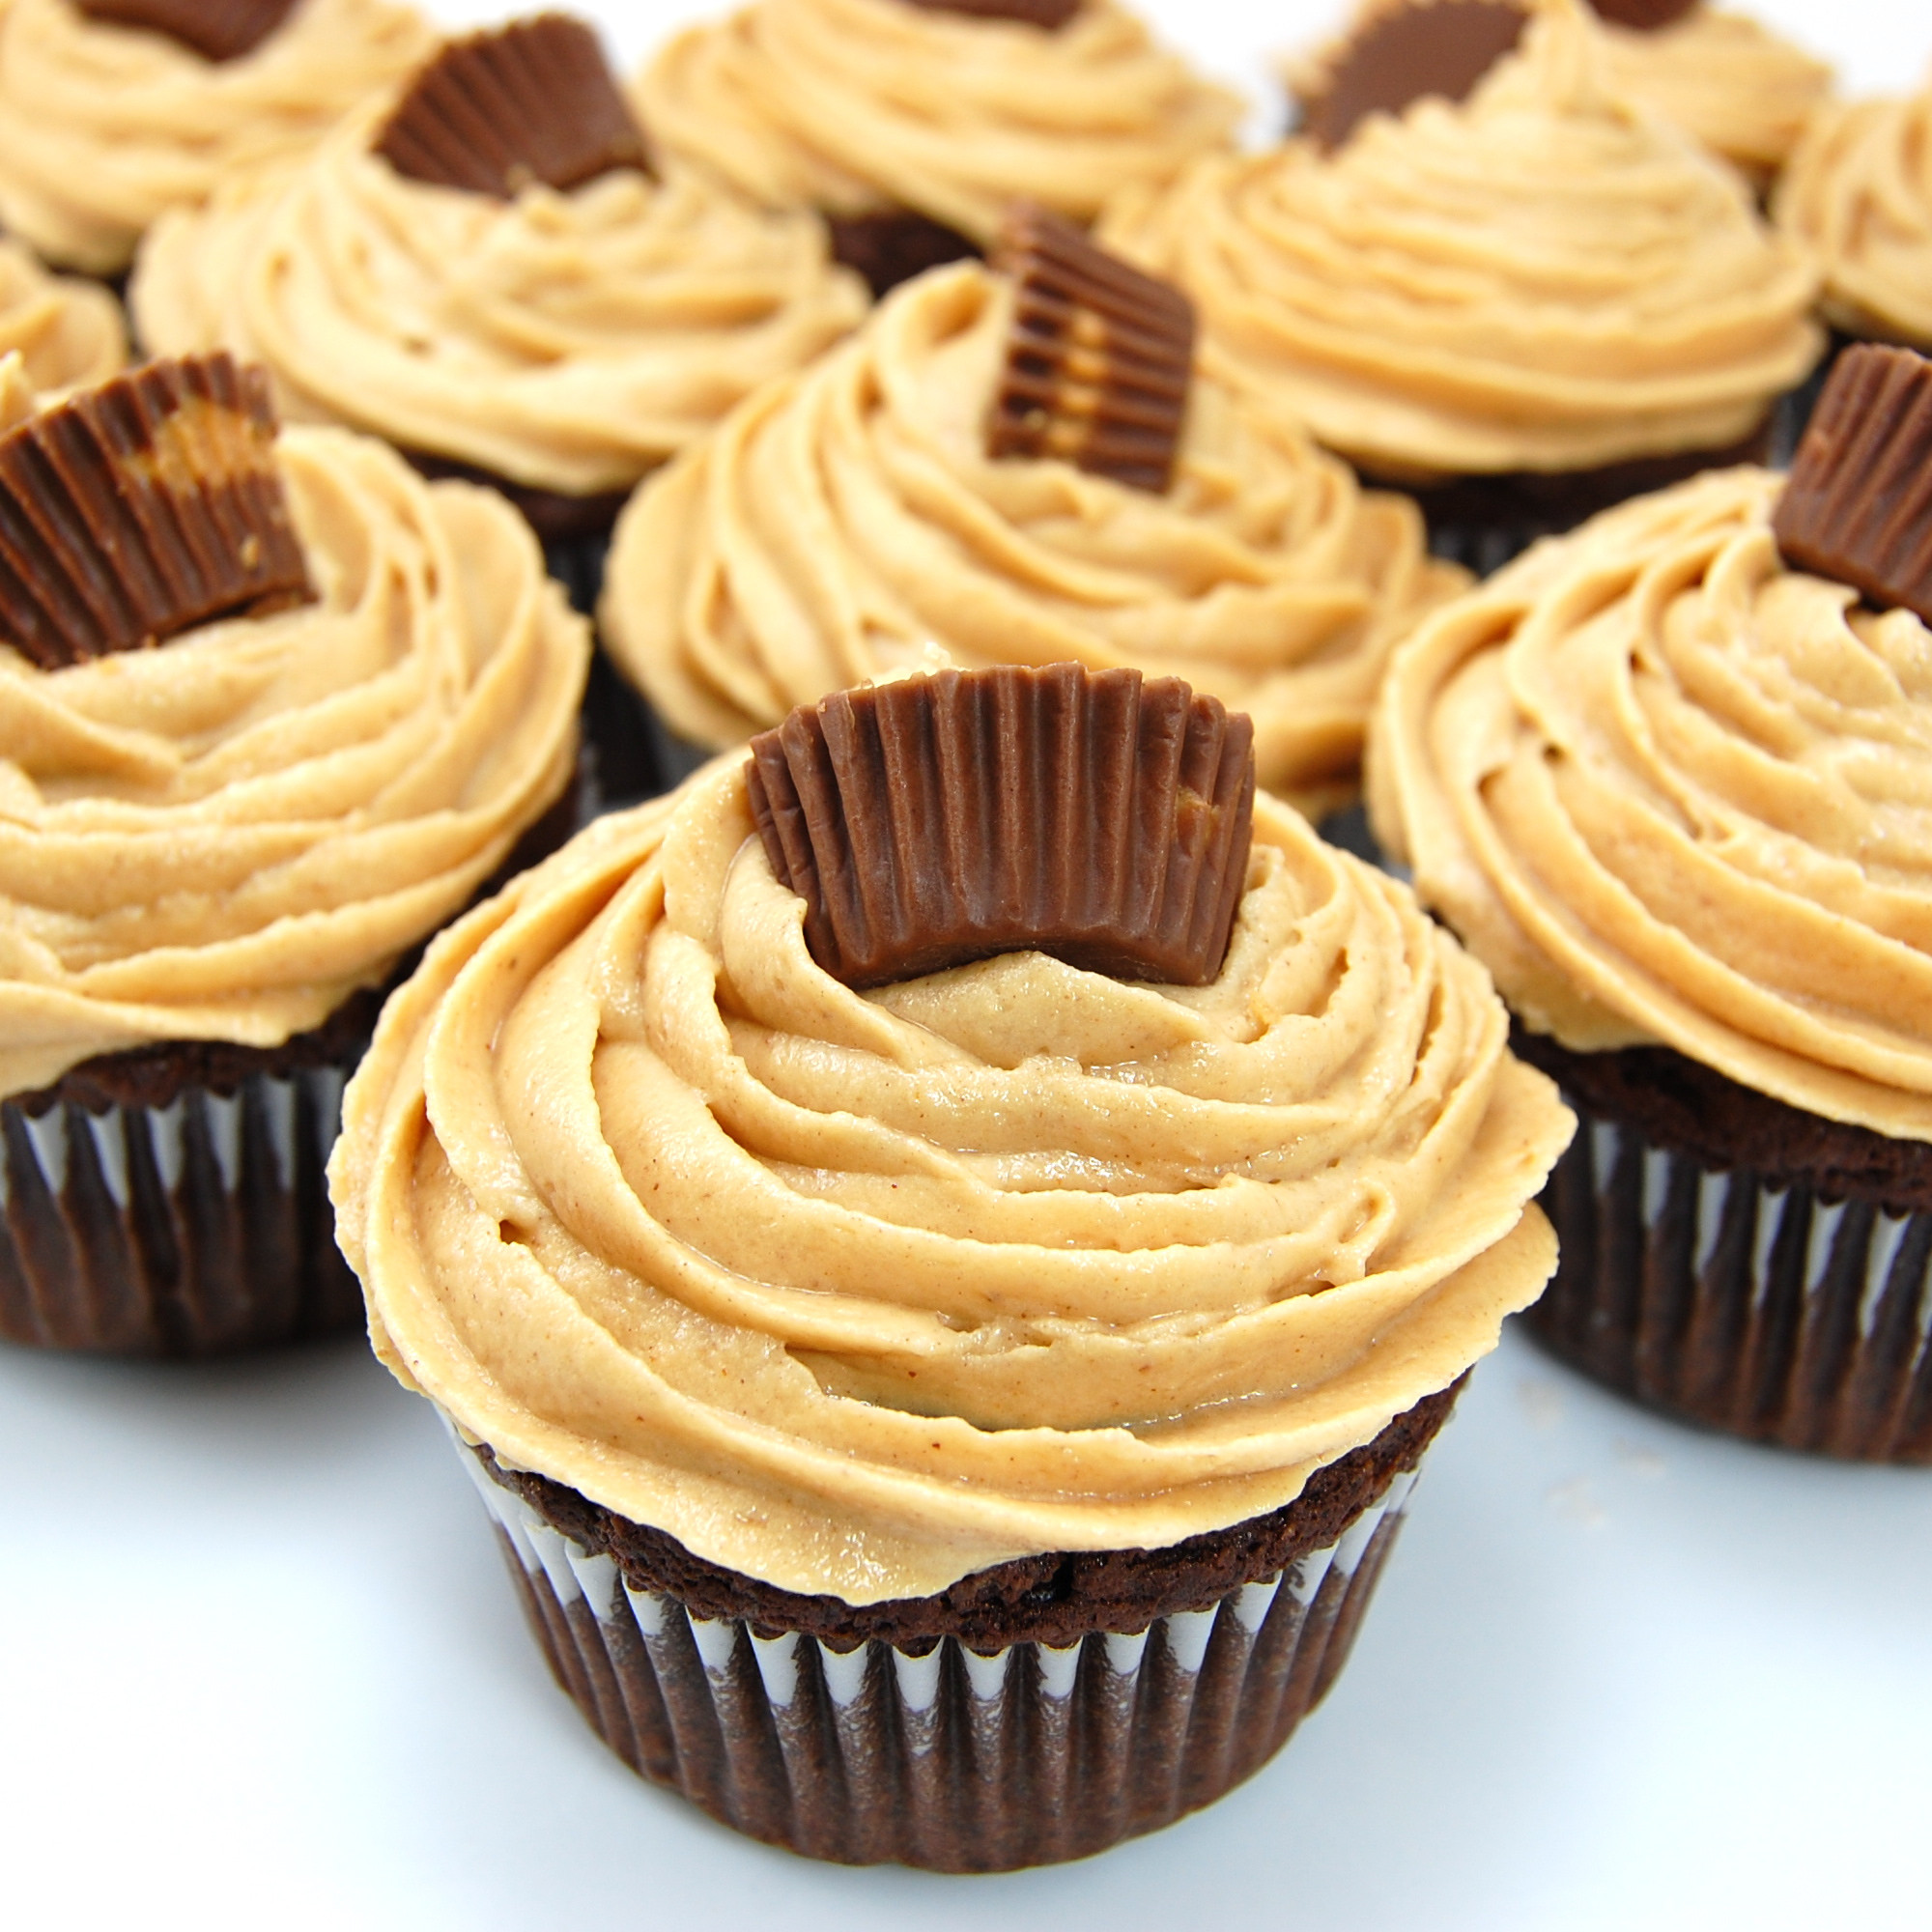 Chocolate Cupcakes With Peanut Butter Frosting
 Dark Chocolate Cupcakes with Peanut Butter Frosting